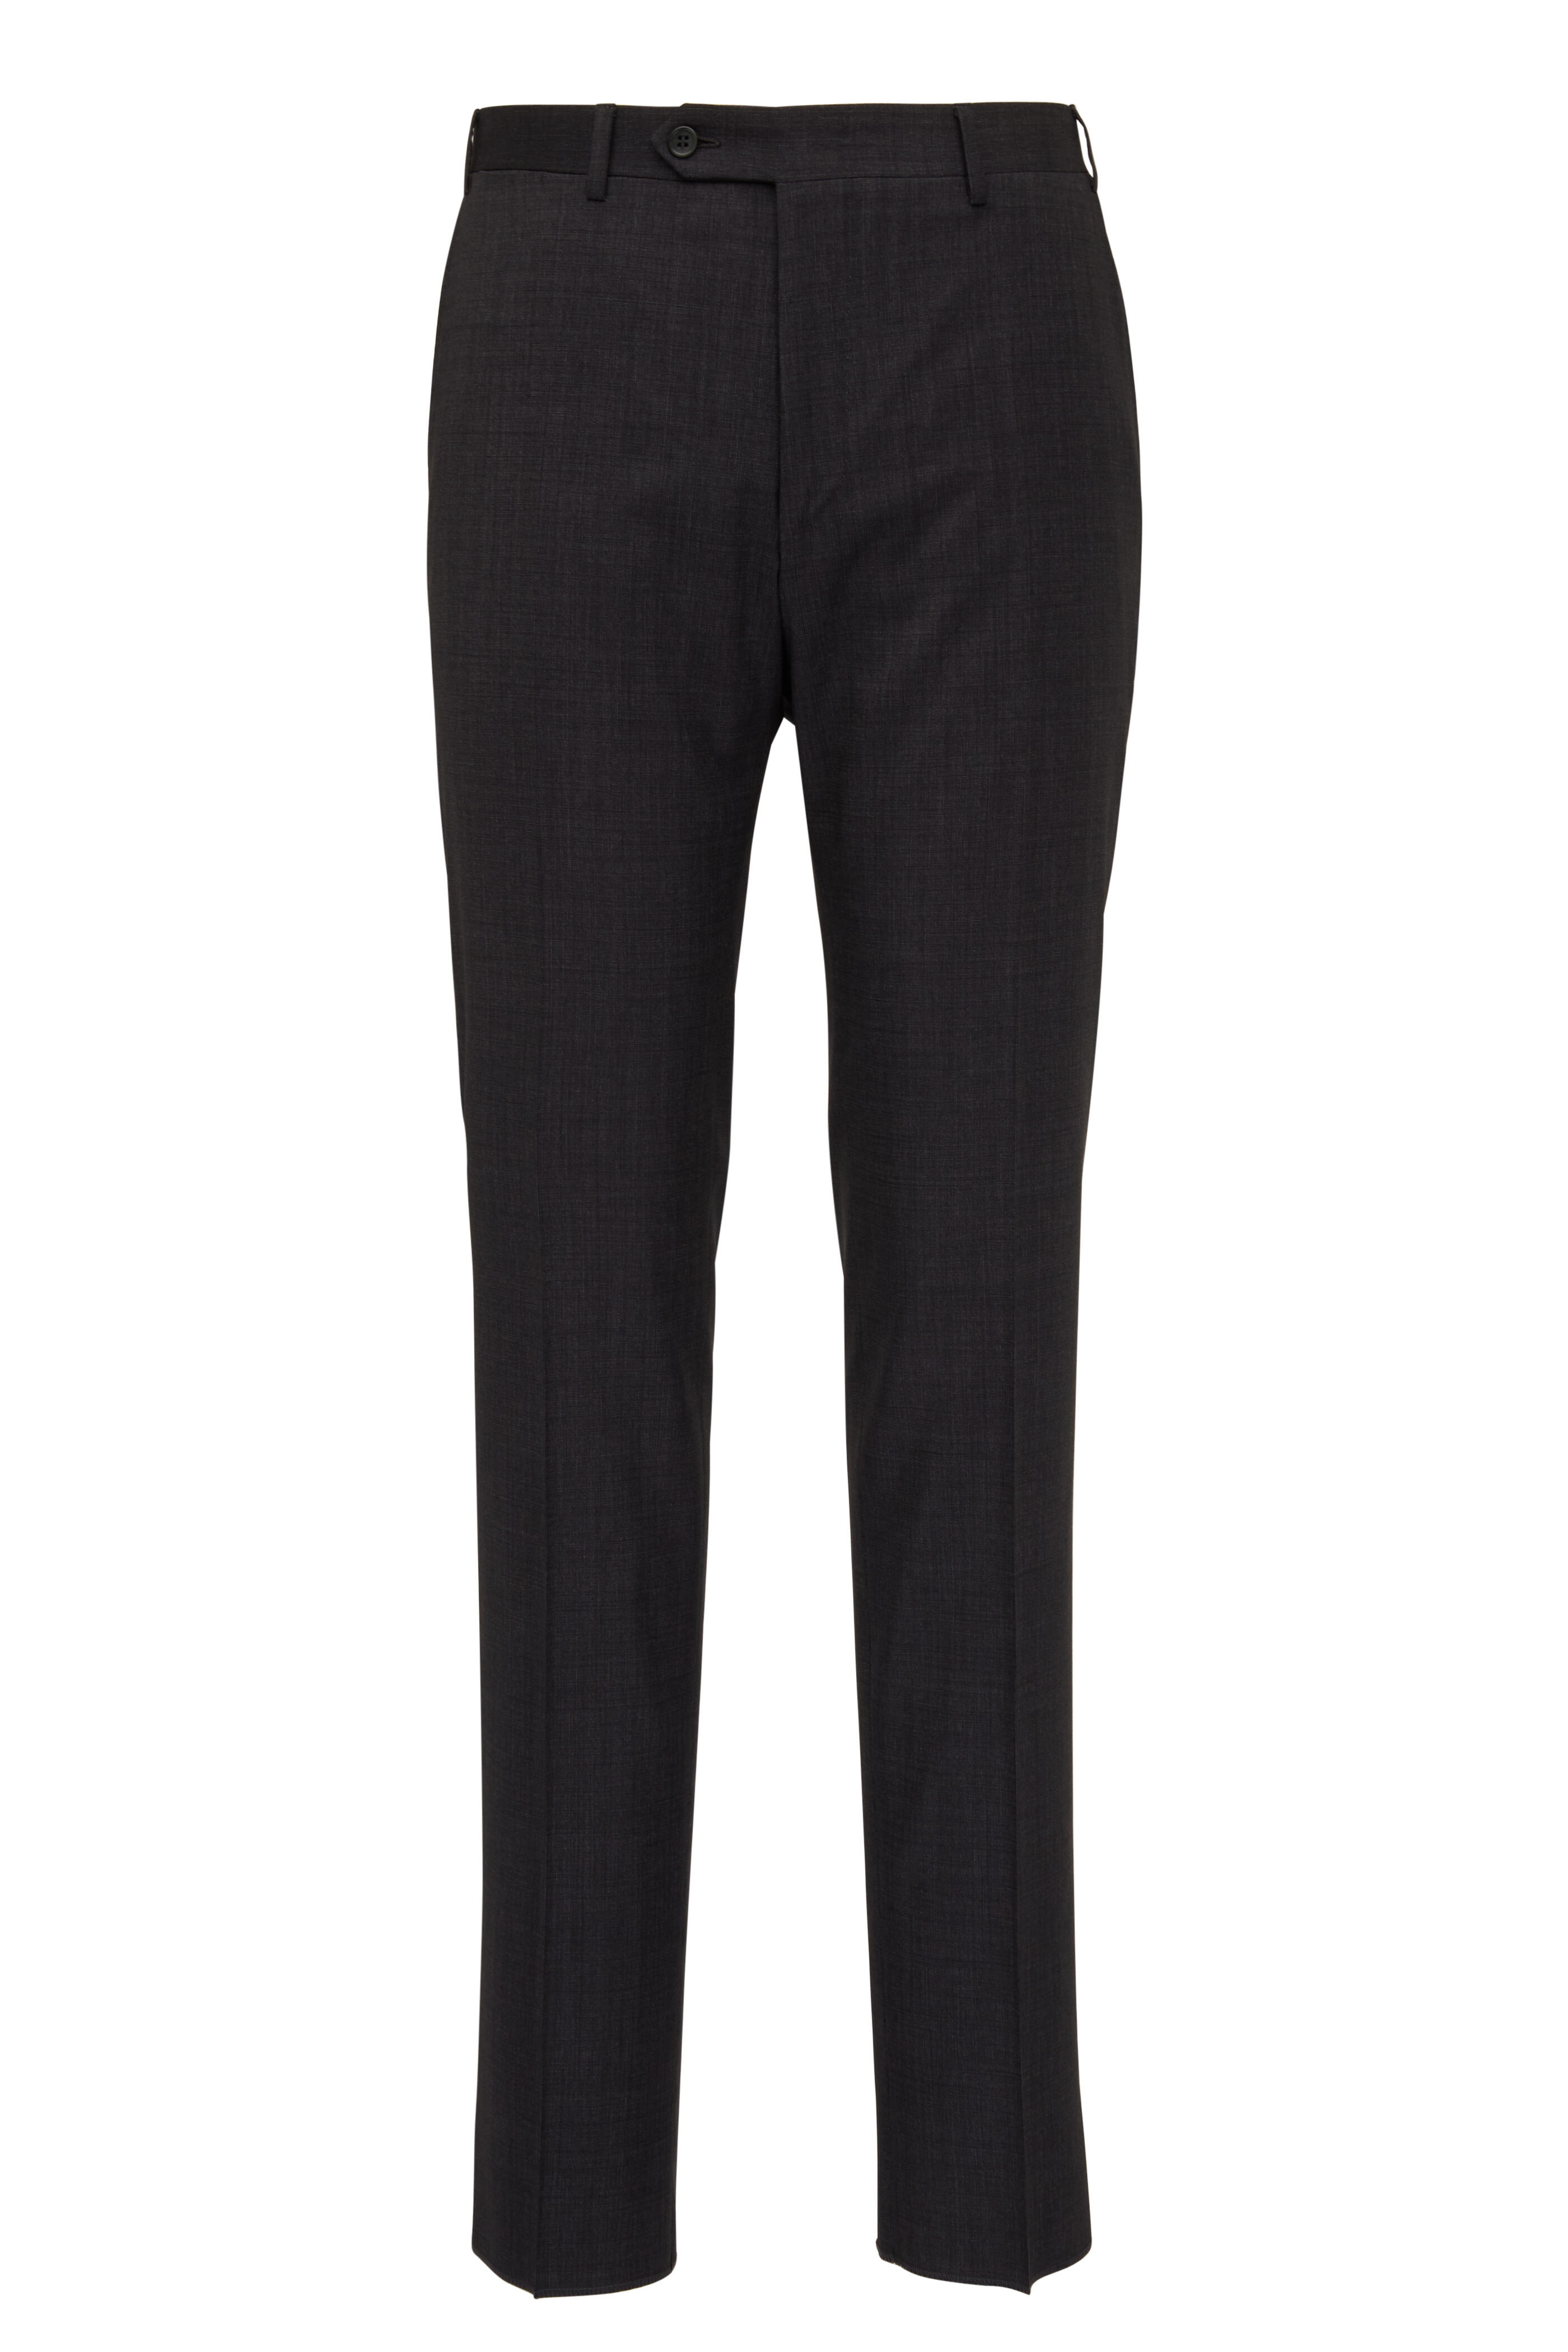 Canali - Charcoal Micro Pindot Neat Wool Suit | Mitchell Stores